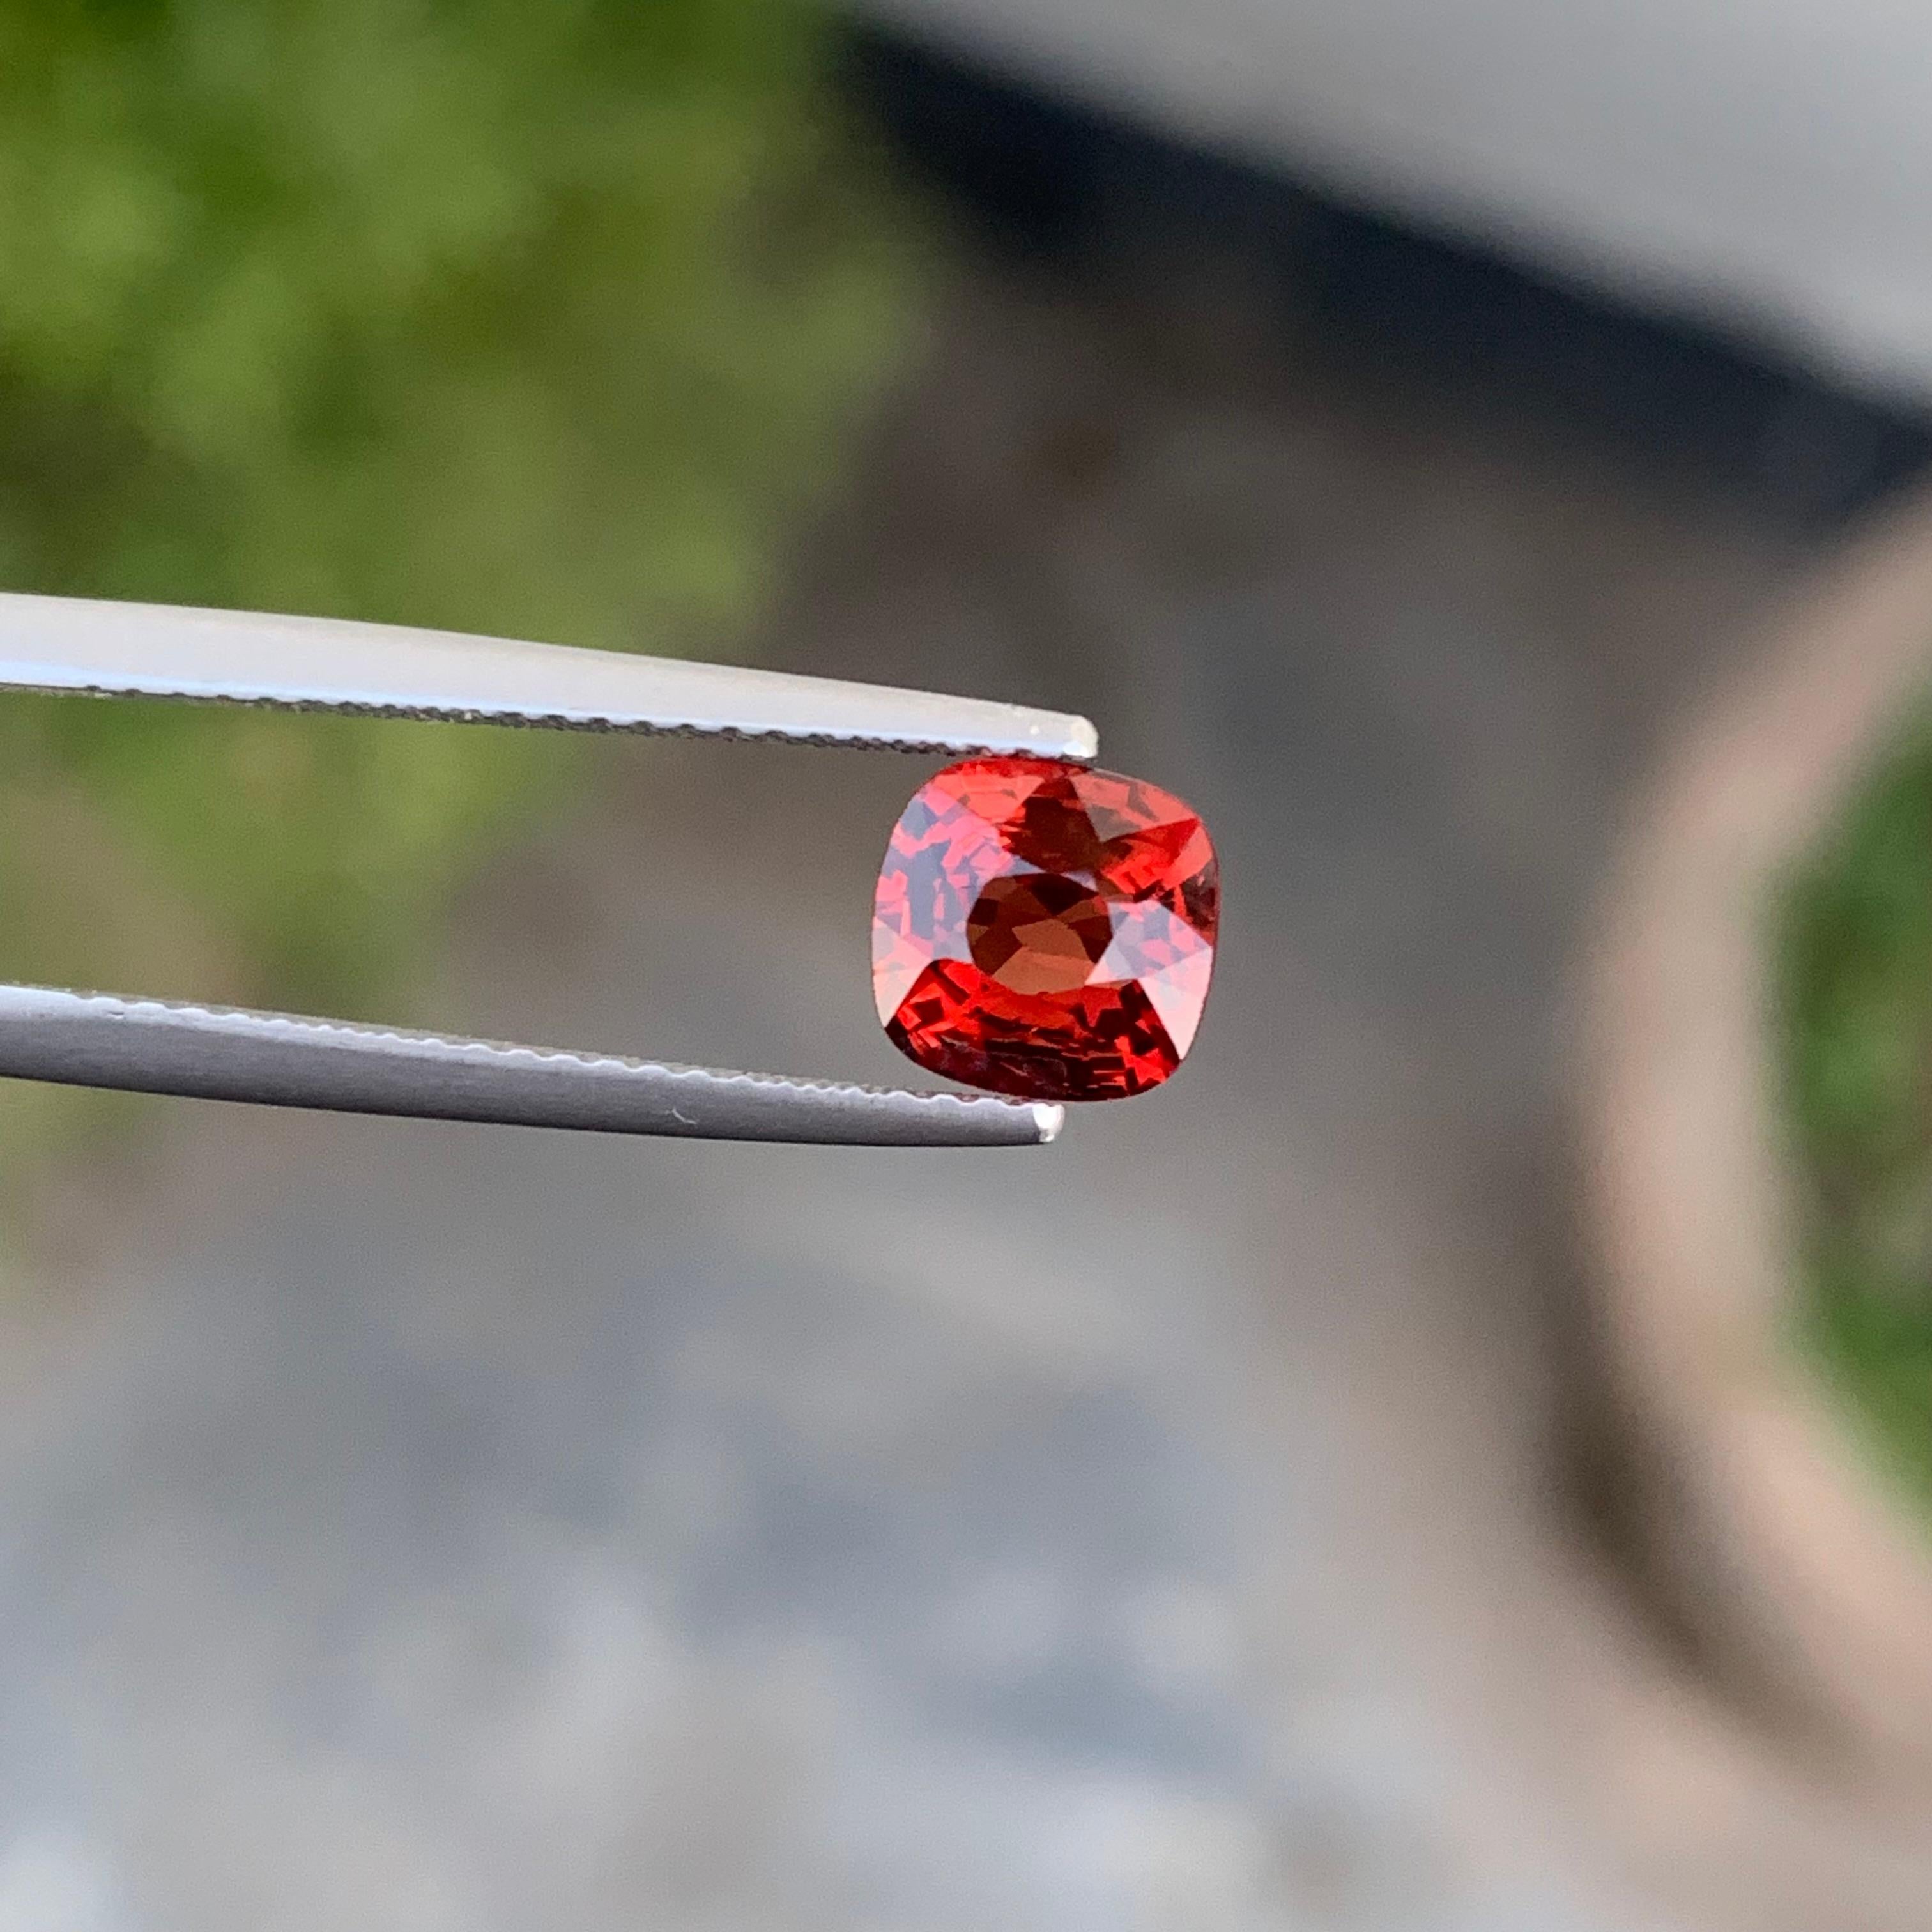 Charming 1.25 Carat Cushion Cut Loose Natural Red Spinel from Burma Myanmar 2